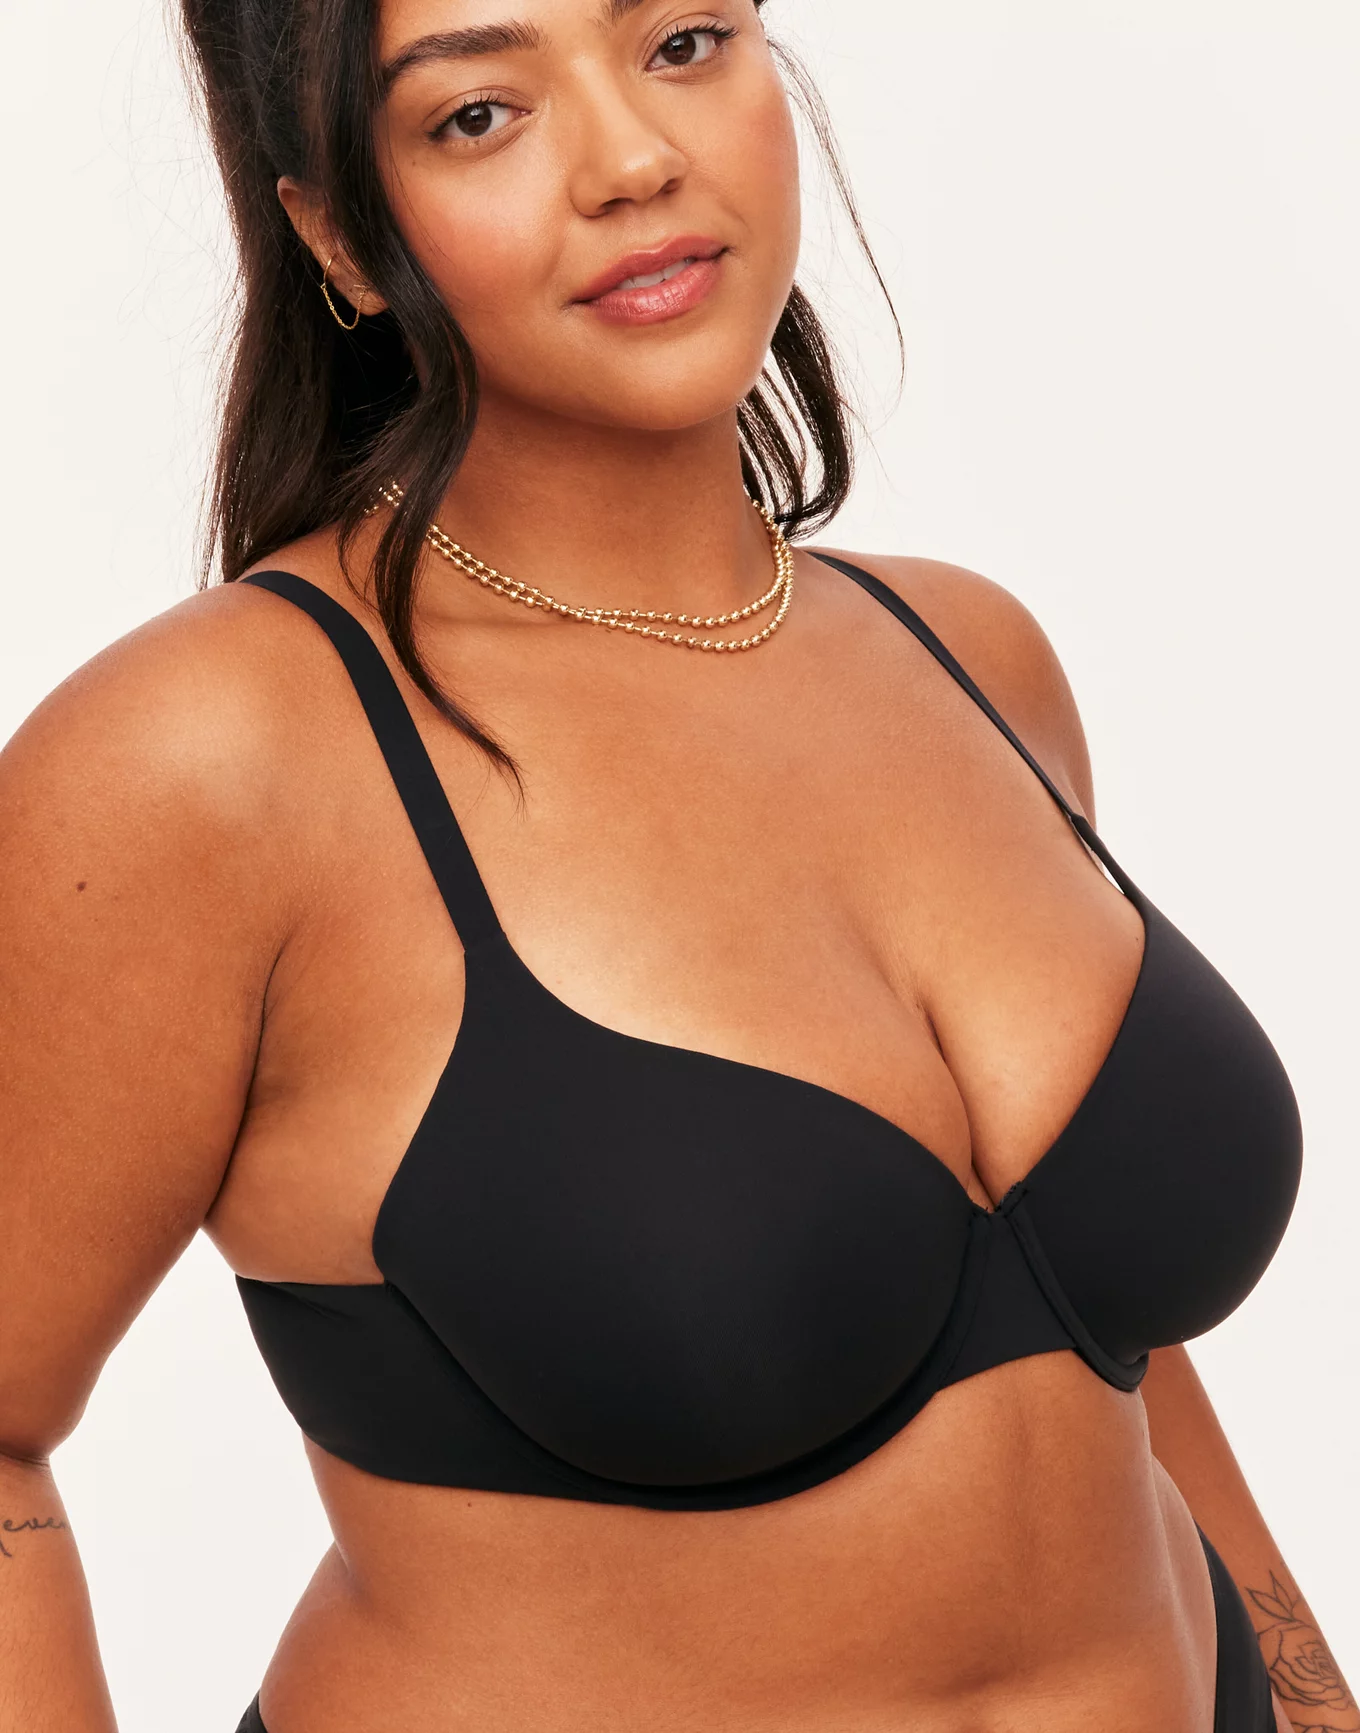 Underwire in 52DD Bra Size C Cup Sizes Black by Leading Lady Contour Bras